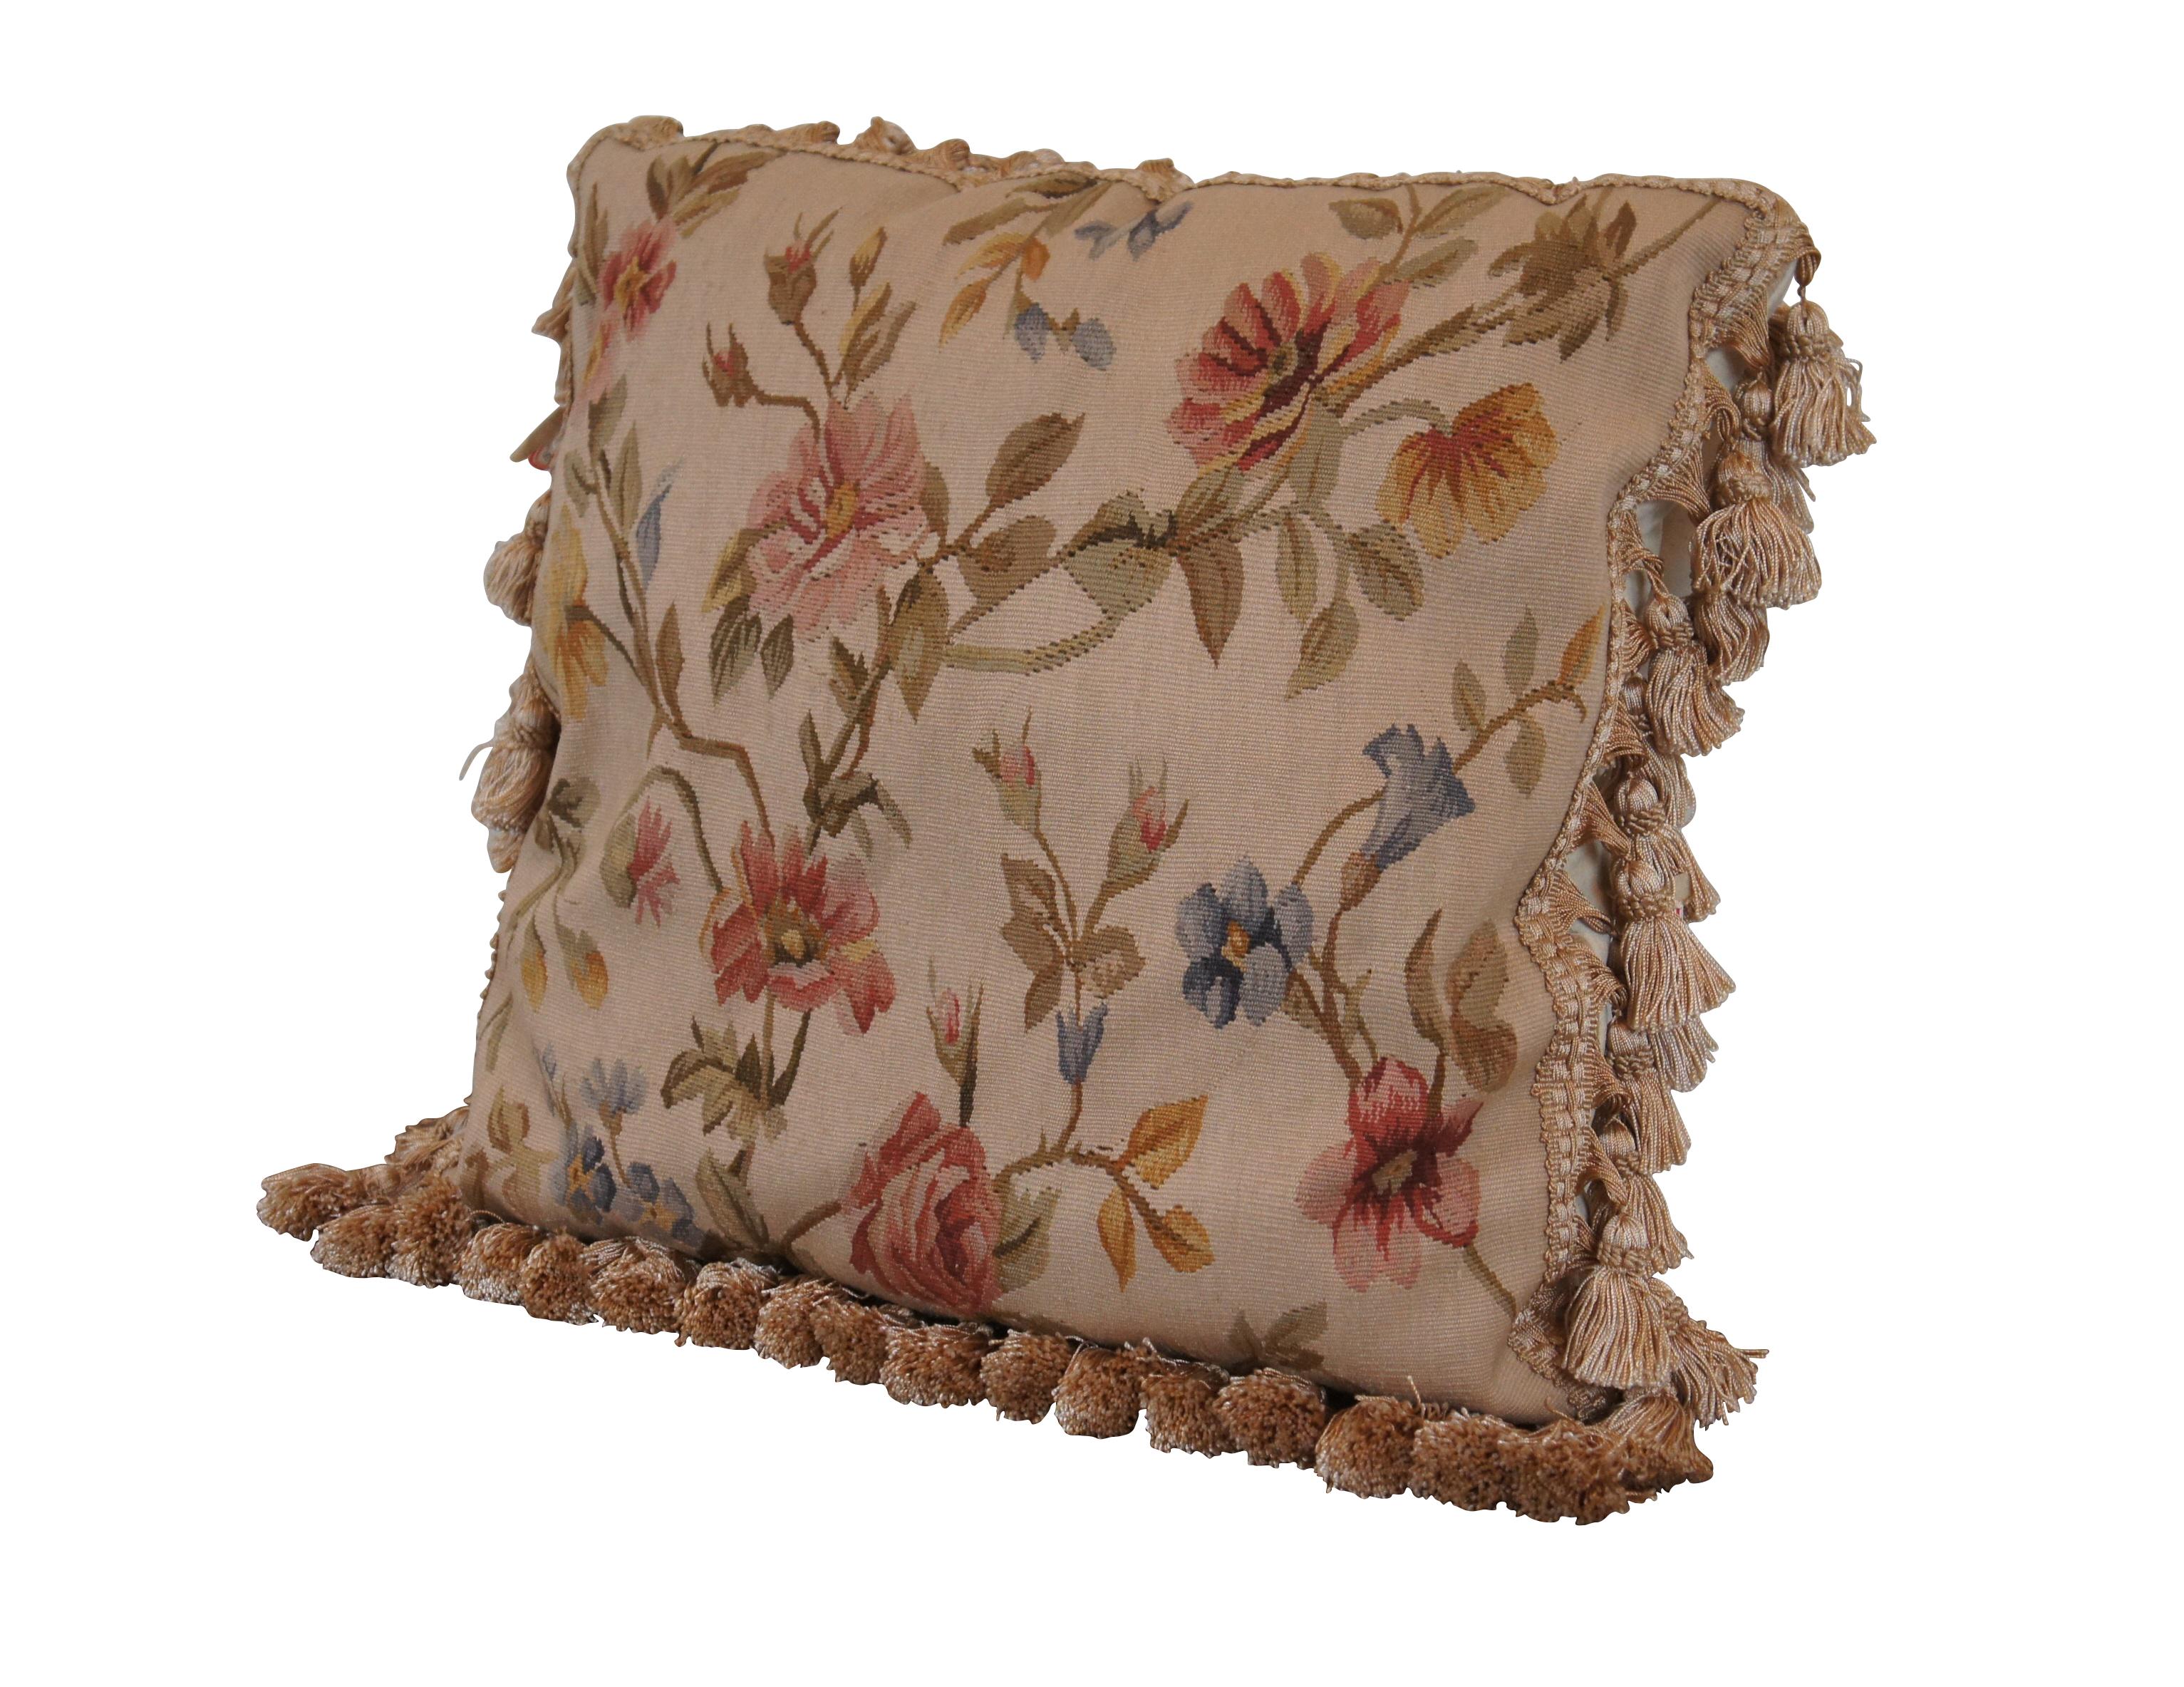 20th century square floral throw pillow, embroidered in wool with blue, pink, and yellow flowers on green-brown branches. Gold tassel trim. Cream velour back with zipper closure. Fiber filled. Made in China by Sea Gull Chinese